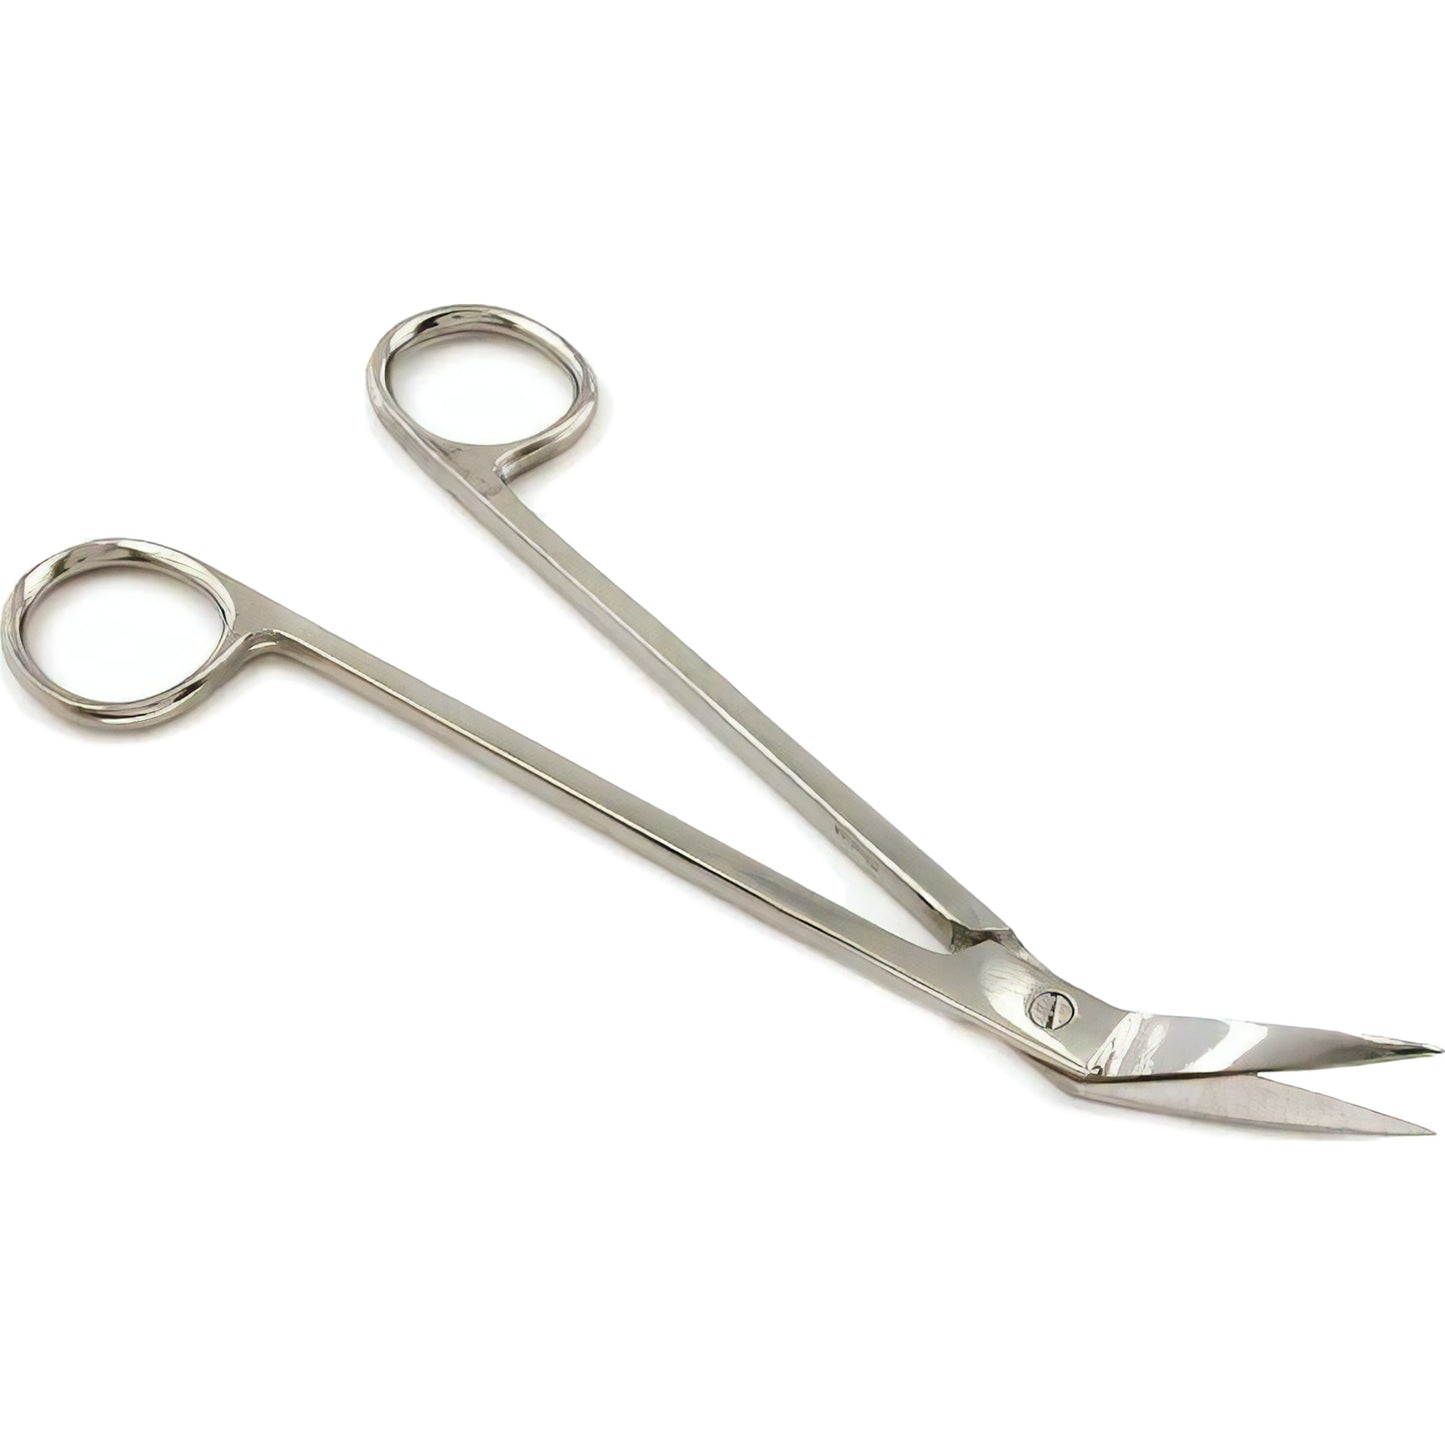 Kelly Angular Scissors for Sewing Embroidering Beading Hobby Craft Tool 6 1/8"